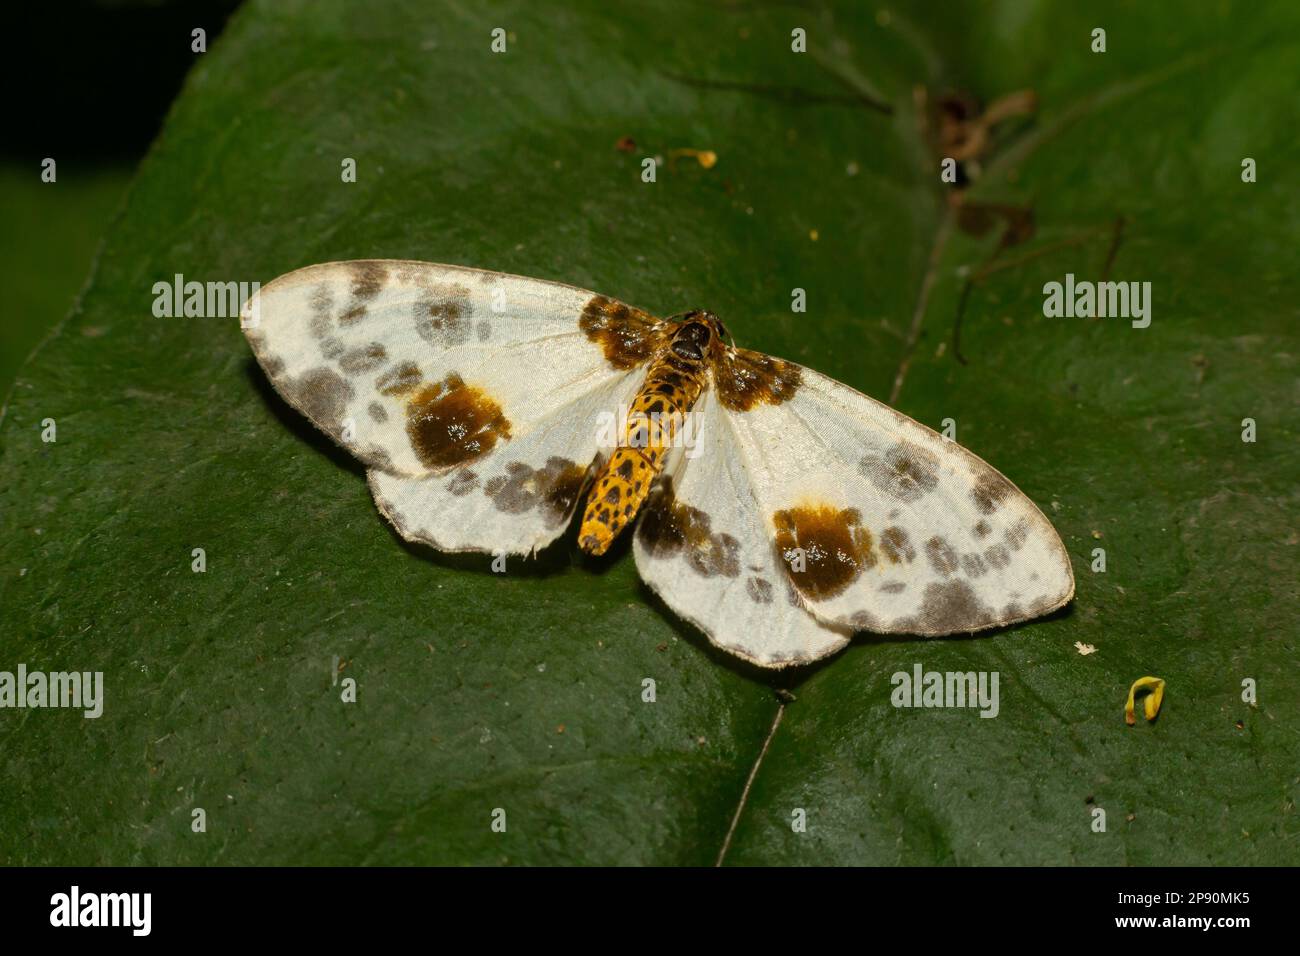 Spotted butterfly abraxas sylvata broadly spread its wings with brown spots. Stock Photo